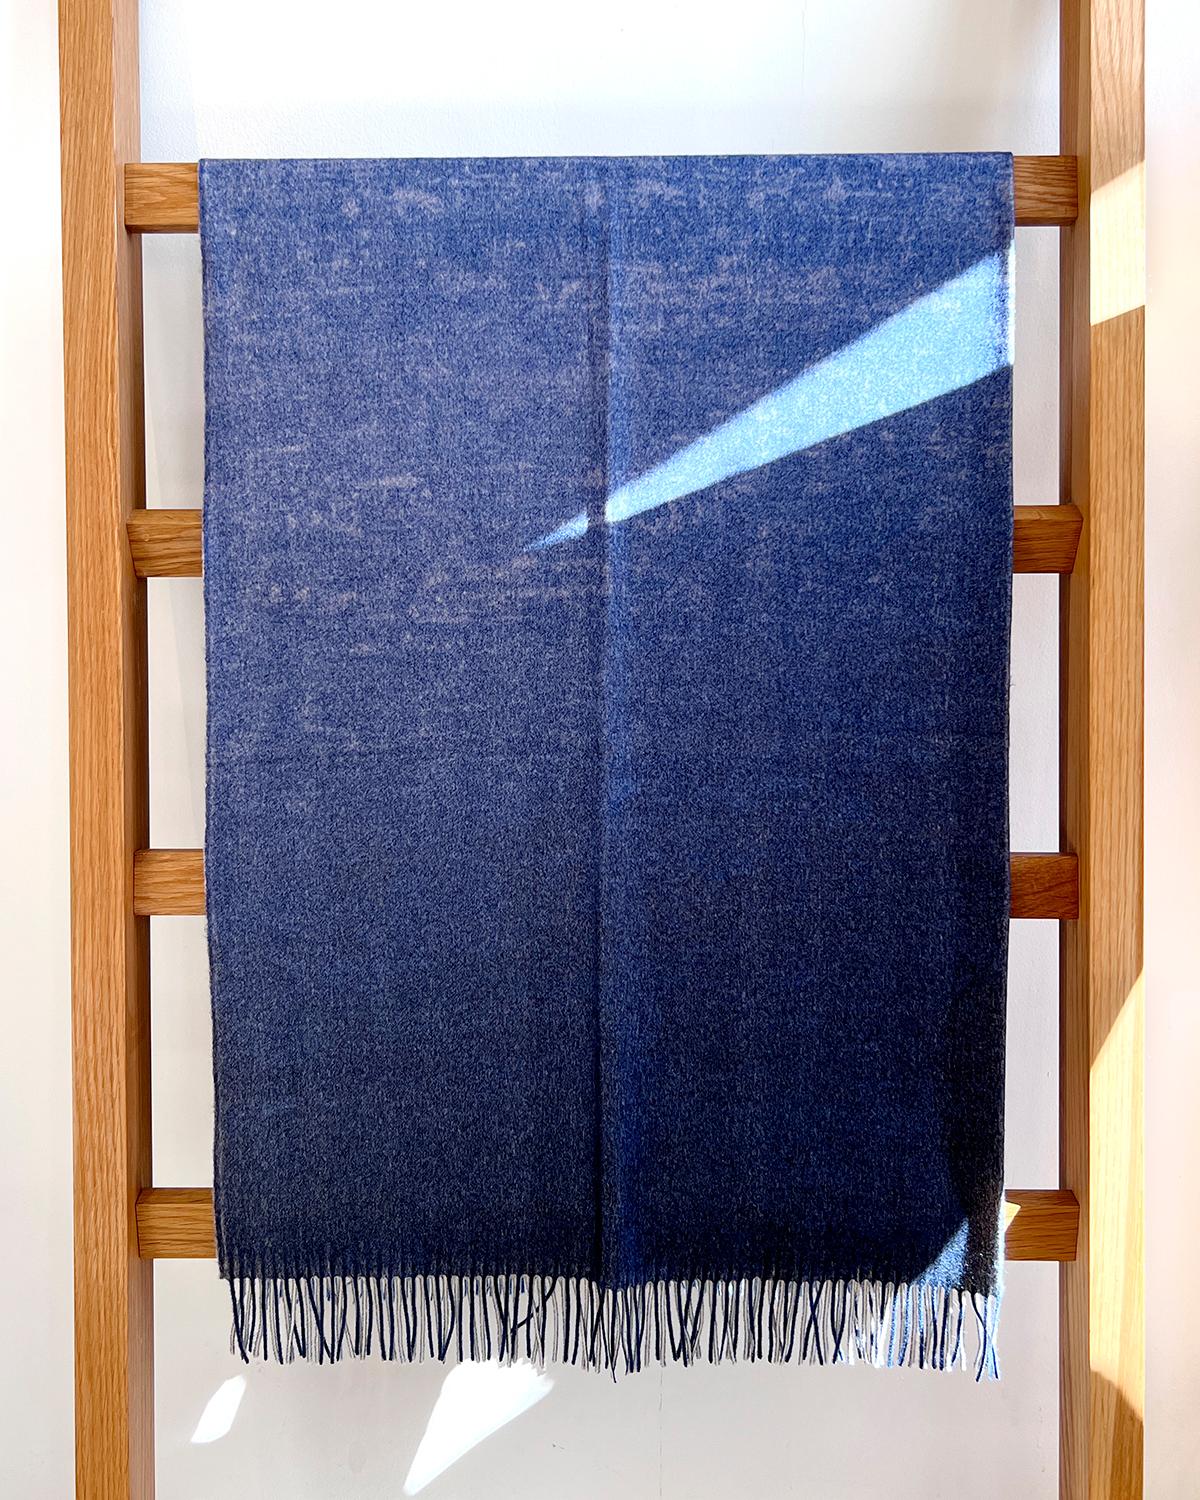 Spanish Ombre Merino Wool Soft Blanket Throw in Deep Blue, in Stock For Sale